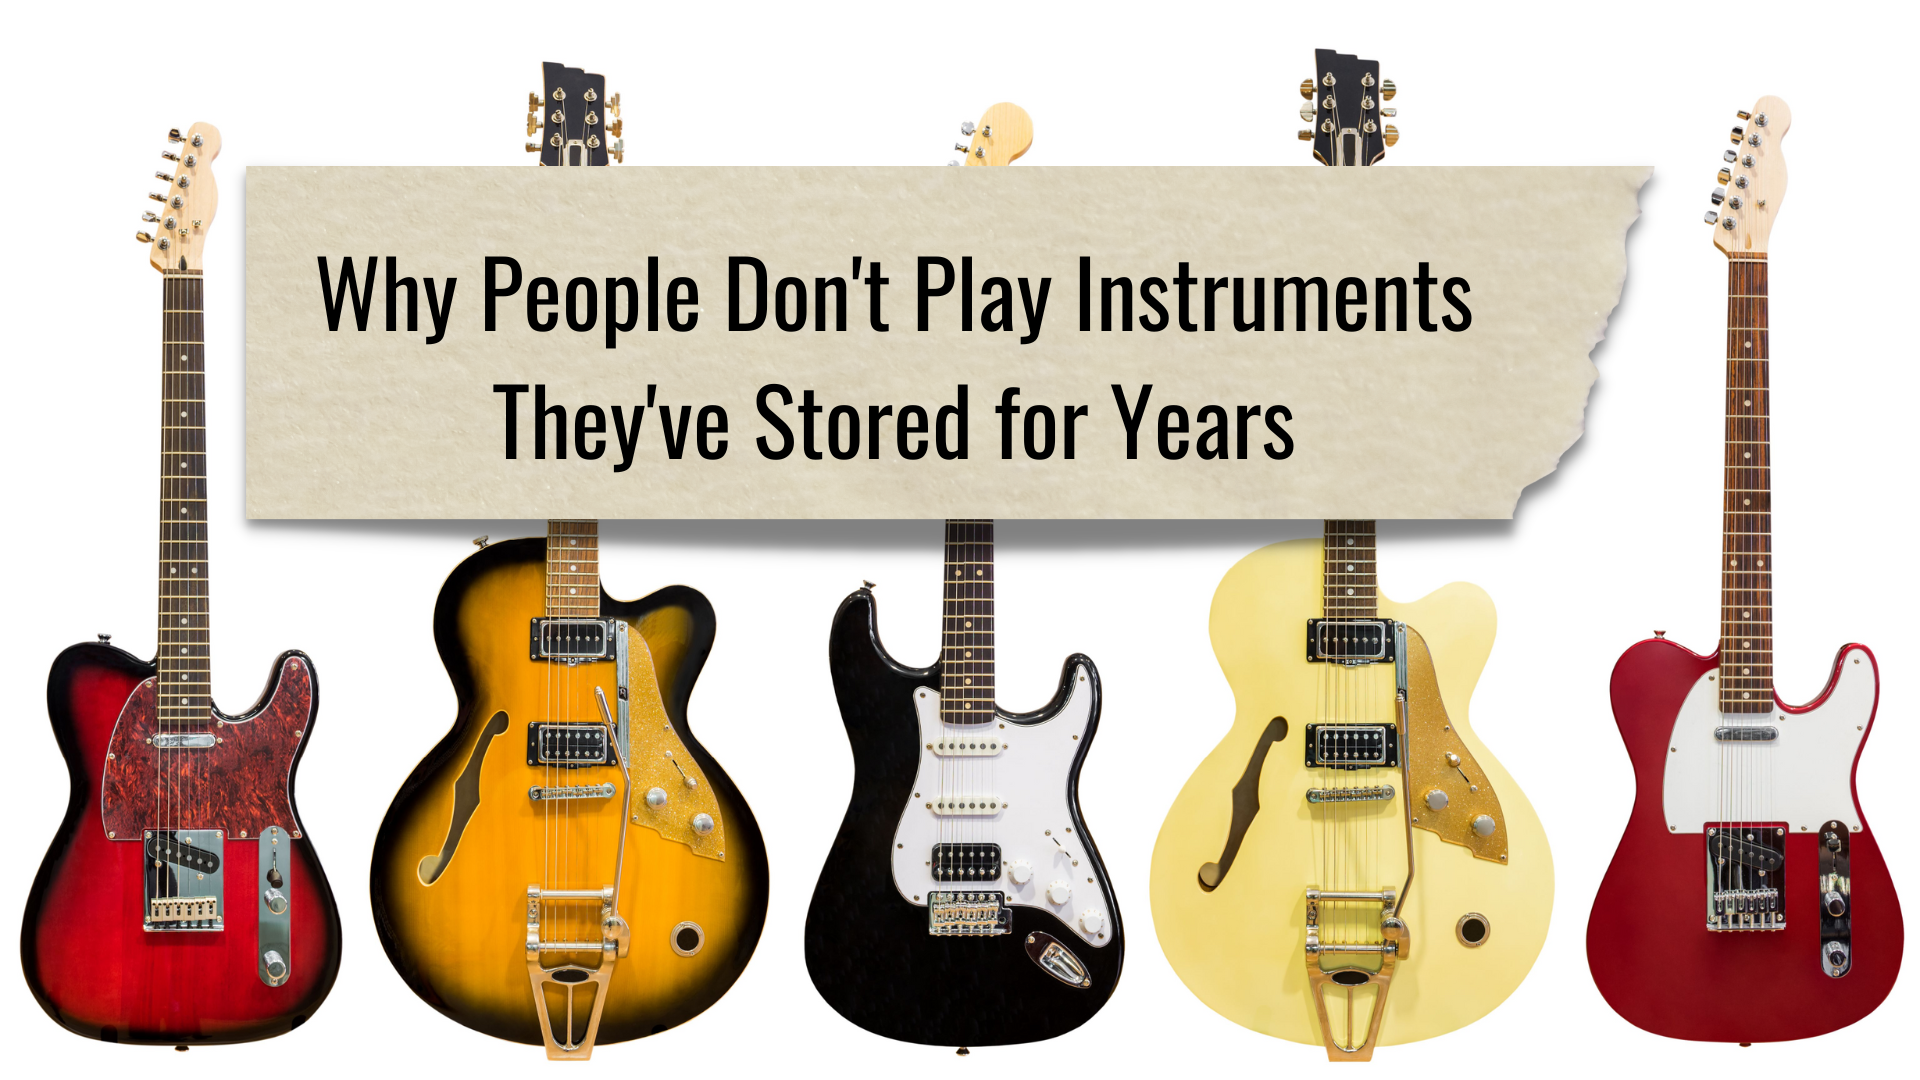 10 Why people don't play instruments they've stored for years